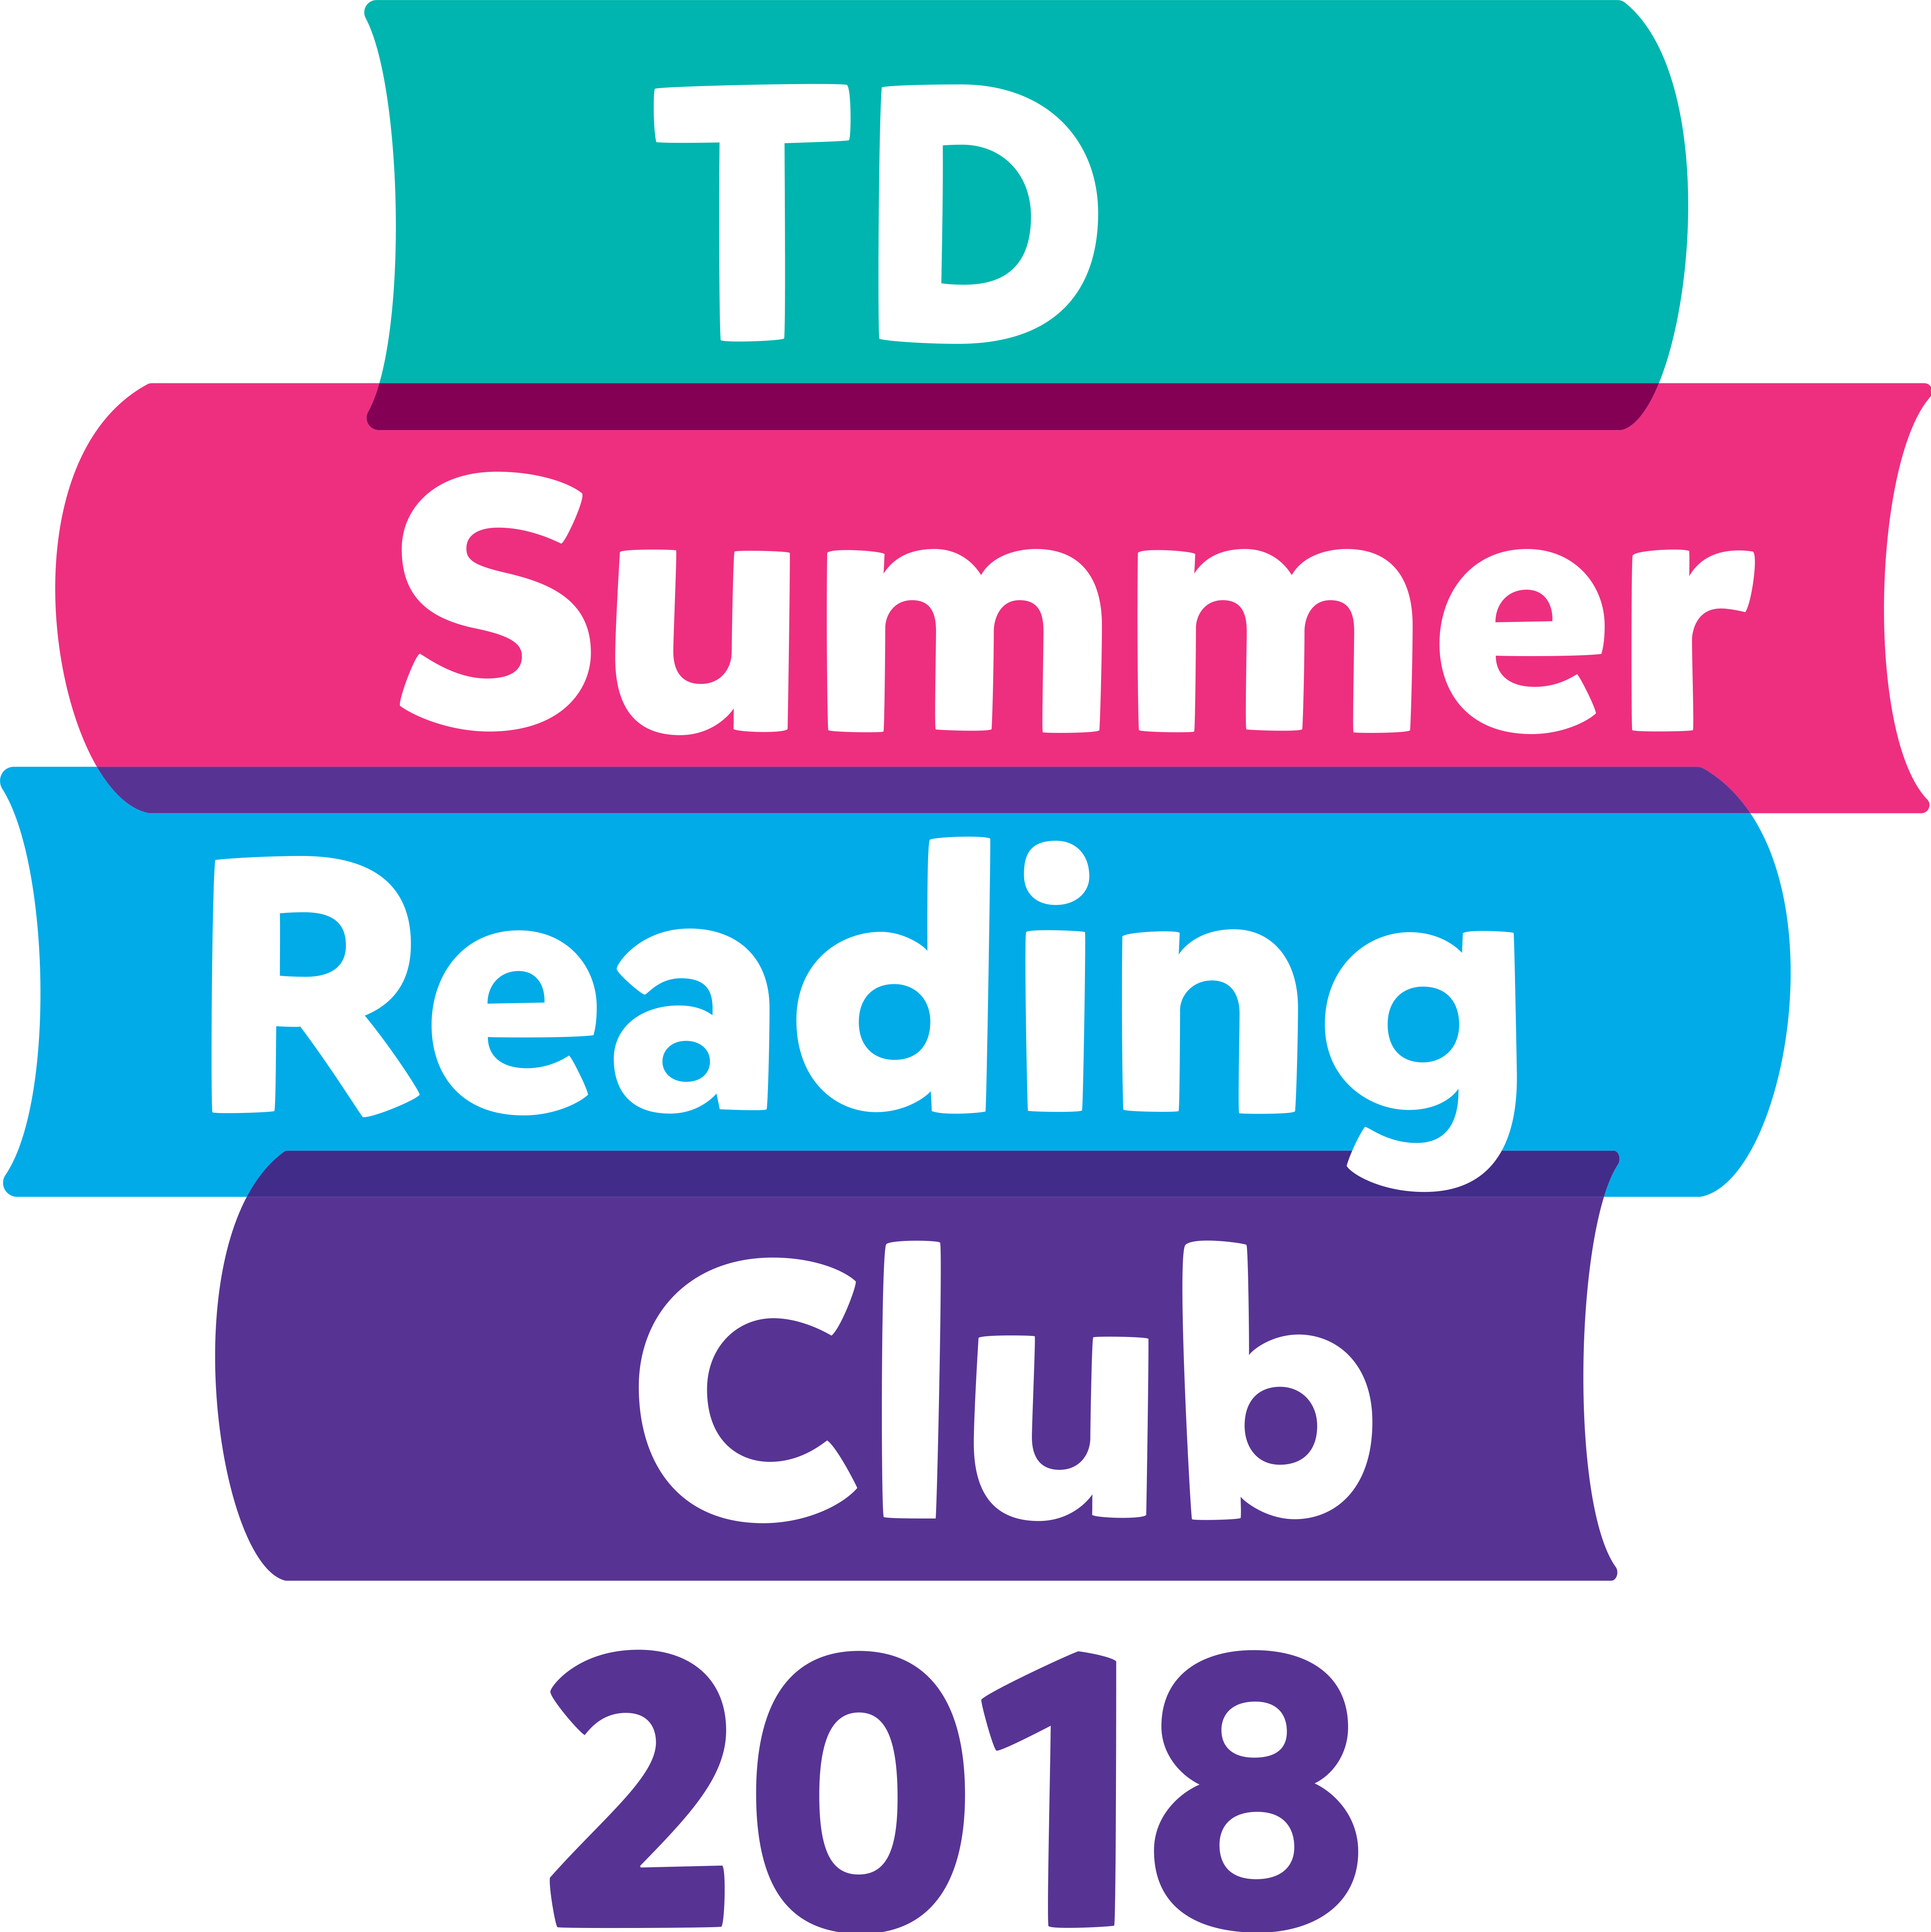 Images - Td Summer Reading Club 2018 (4800x4803)